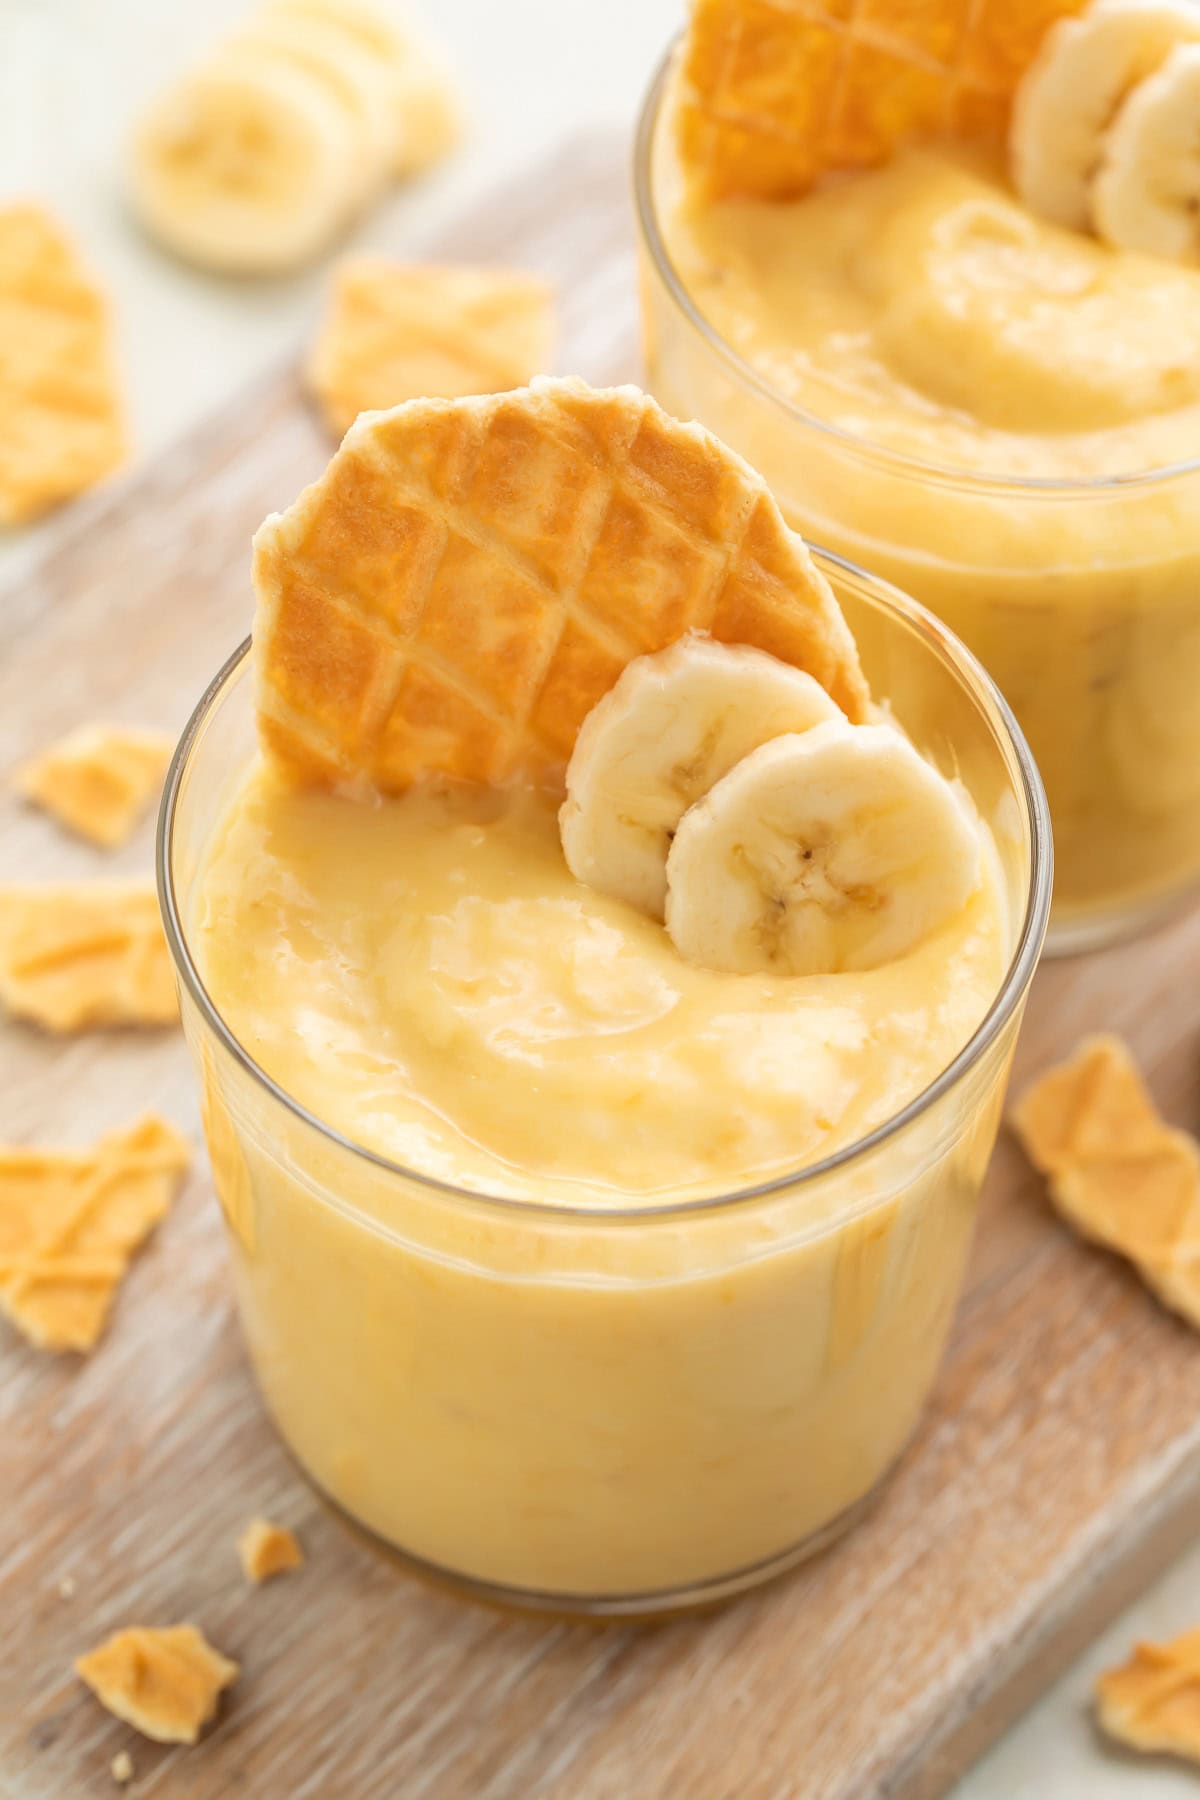 A small glass cup holding banana custard with a waffle cone cookie and two slices of banana on top for garnish.